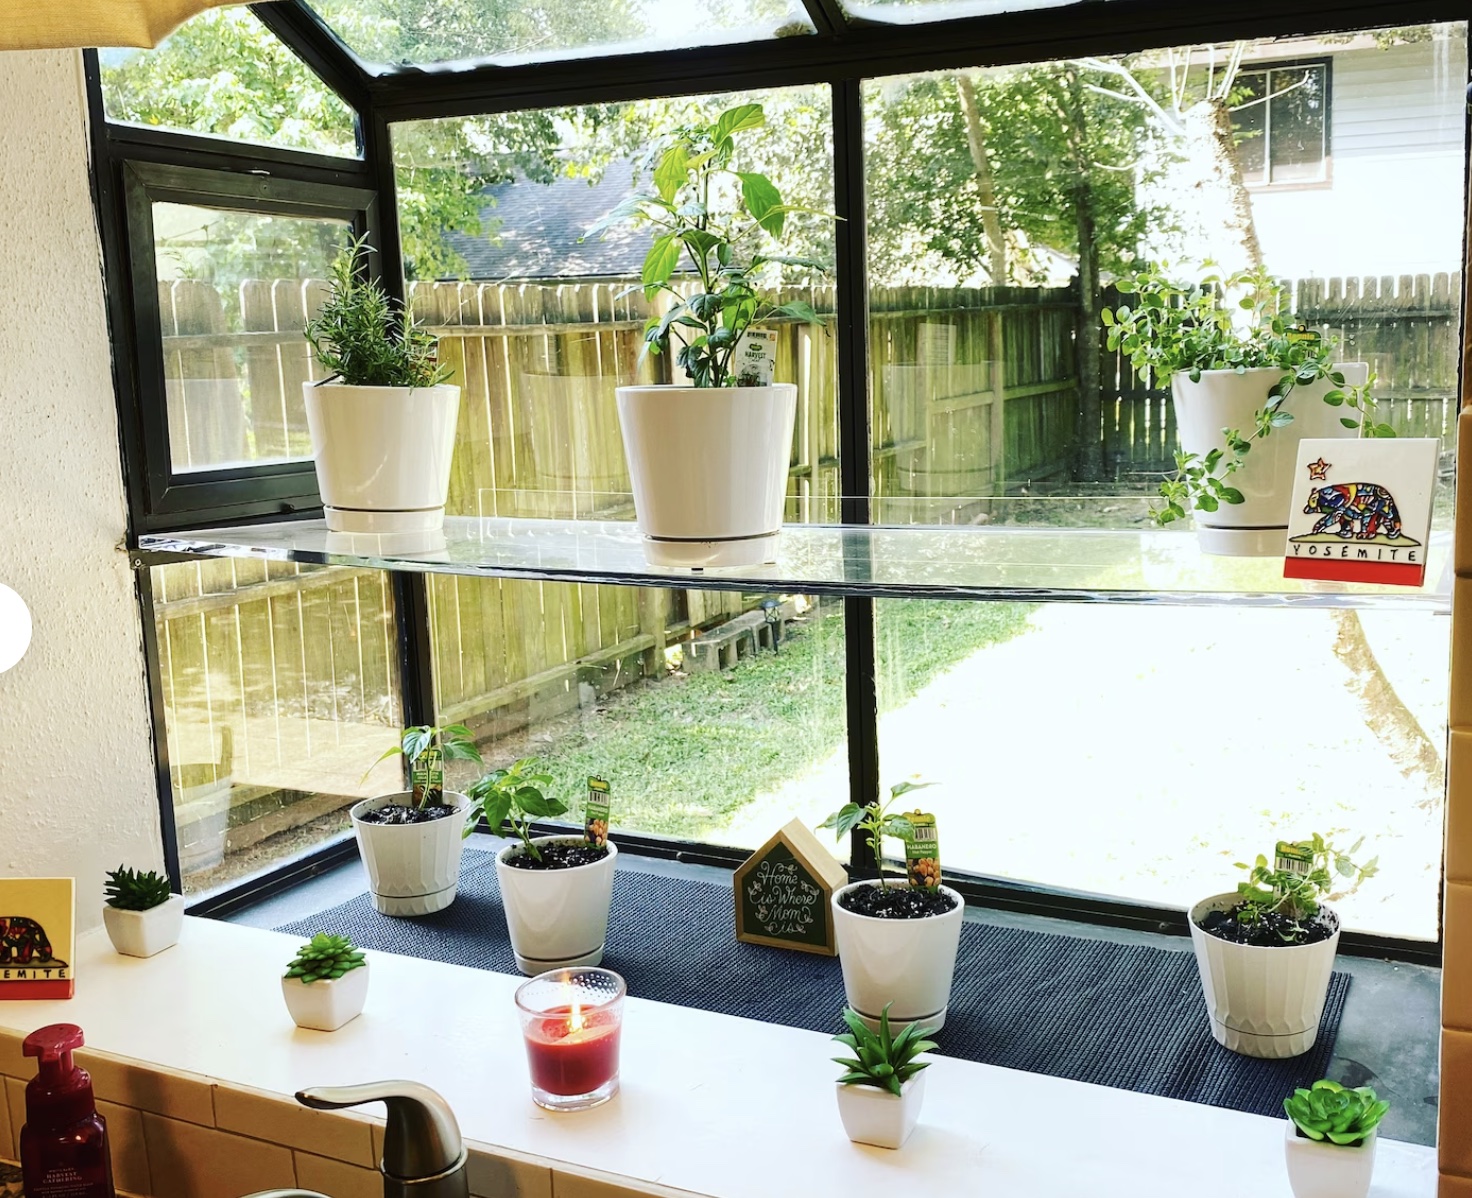 Etsy ways to dress up a window glass shelves in a kitchen window overlooking a backyard